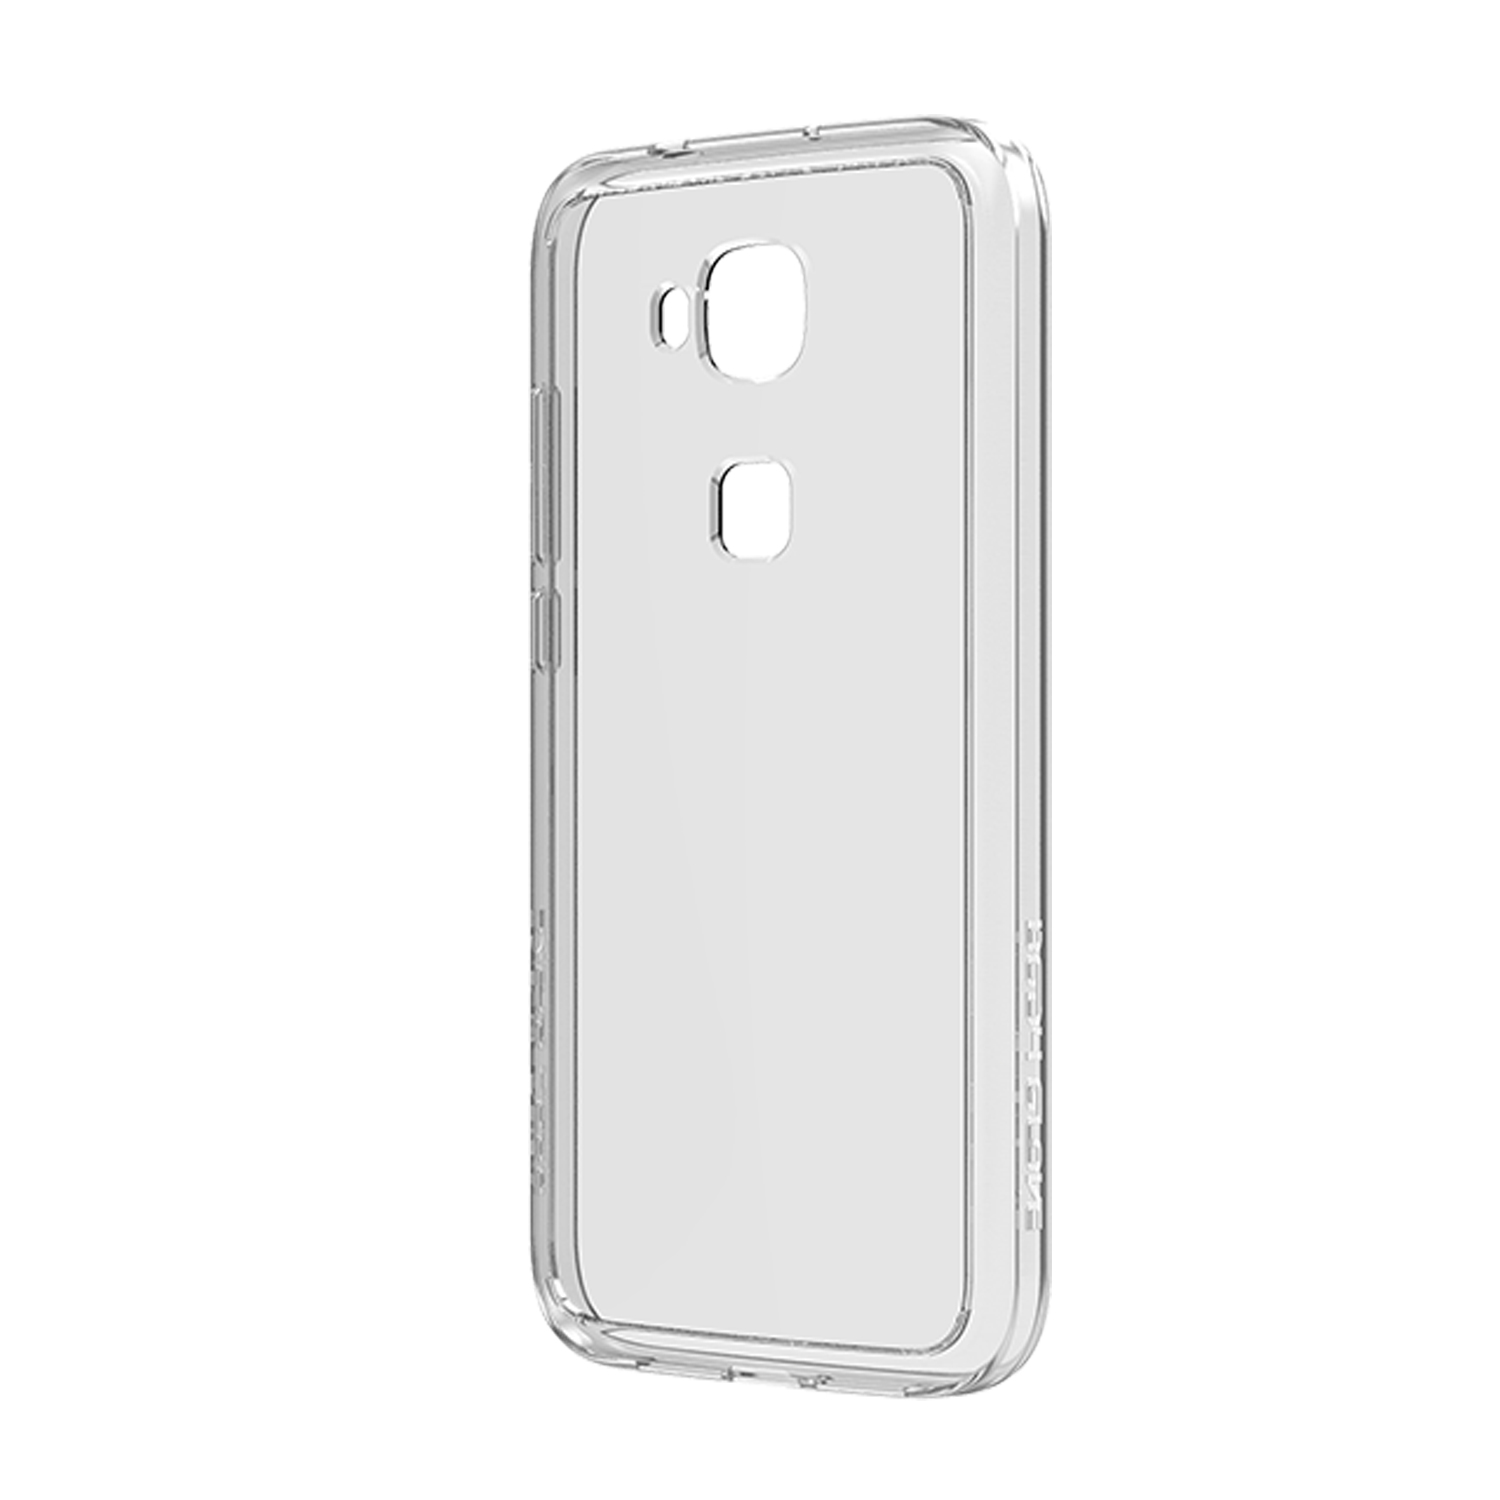 Body Glove Ghost Case for Huawei G8 - Clear